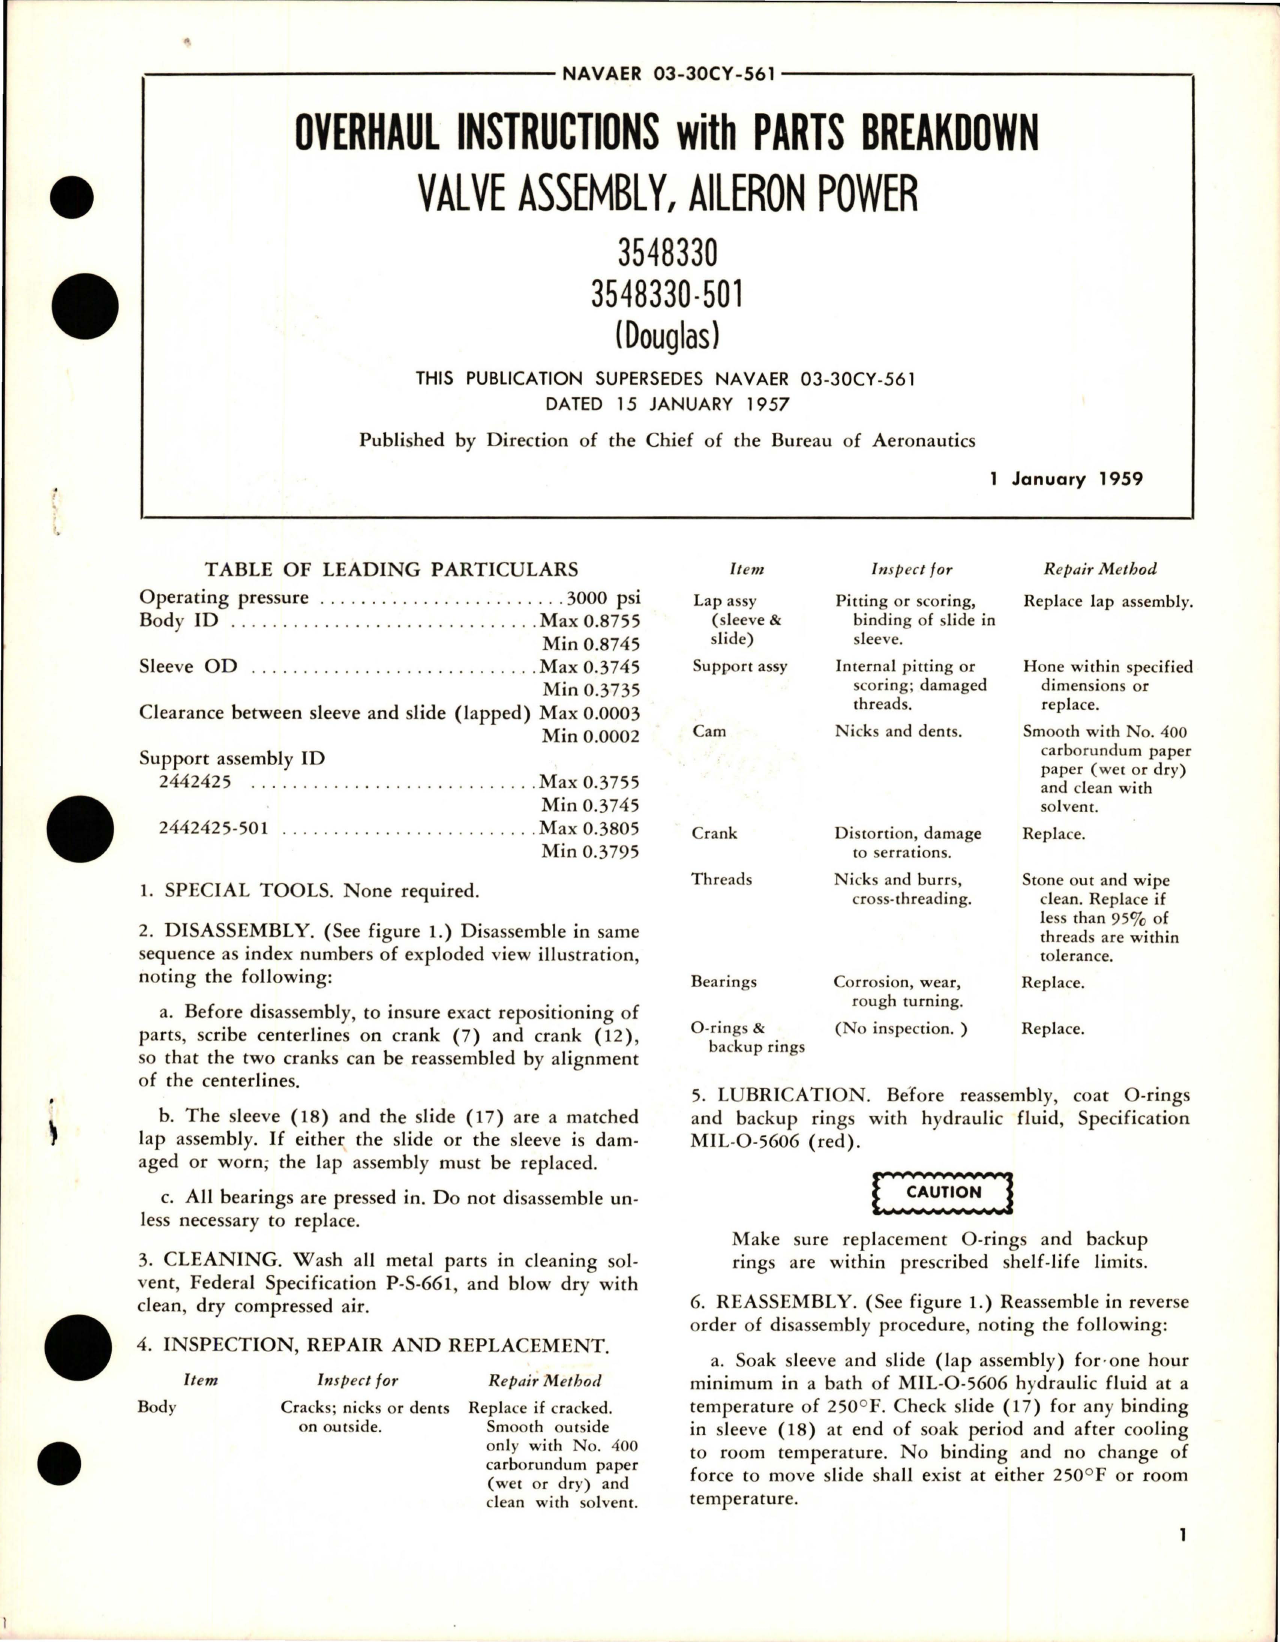 Sample page 1 from AirCorps Library document: Overhaul Instructions with Parts Breakdown for Aileron Power Valve Assembly - 3548330 and 3548330-501